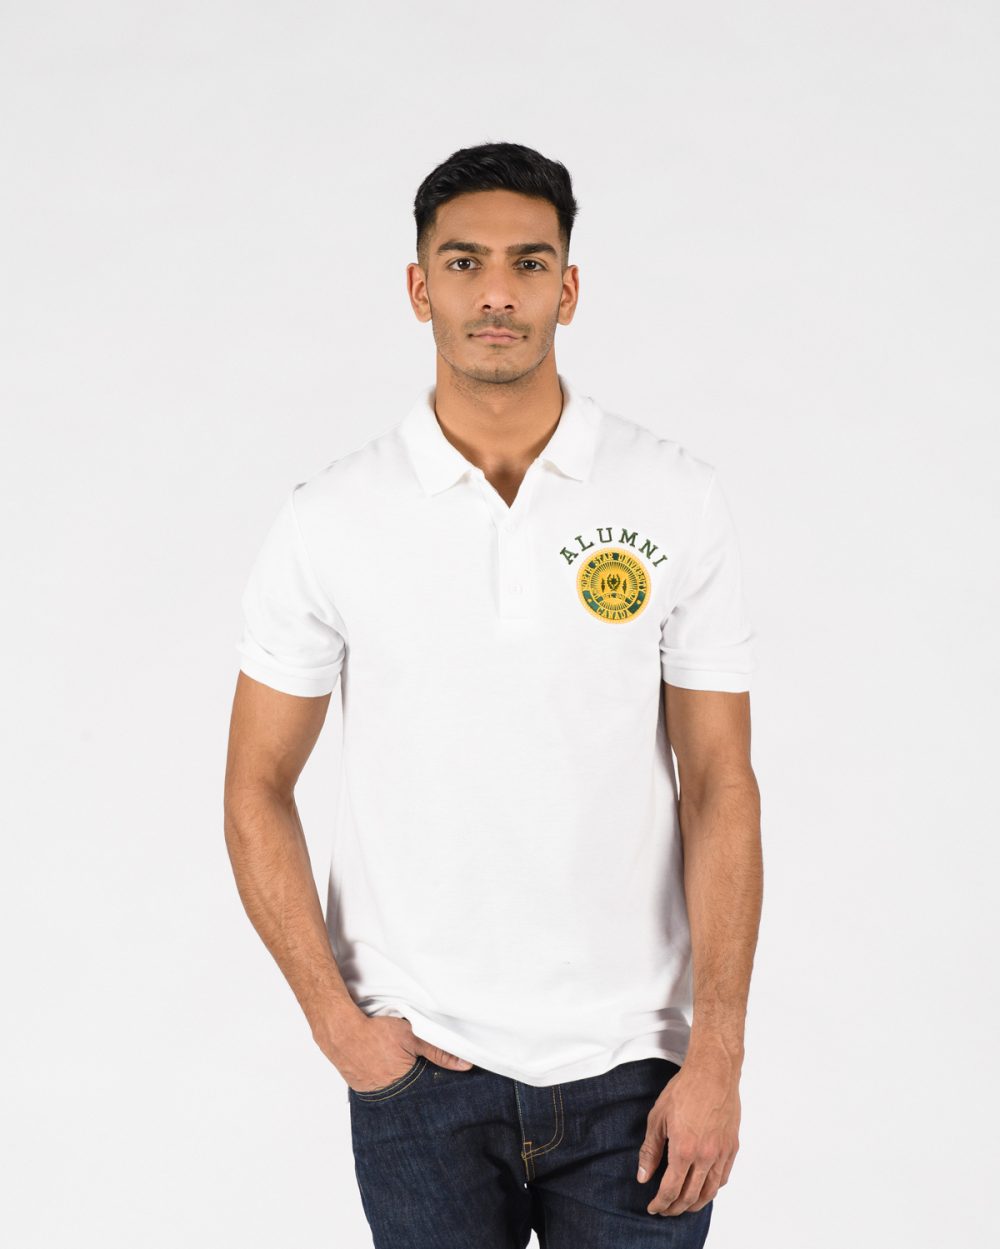 Signature Golf Shirt 306 in white on male model.